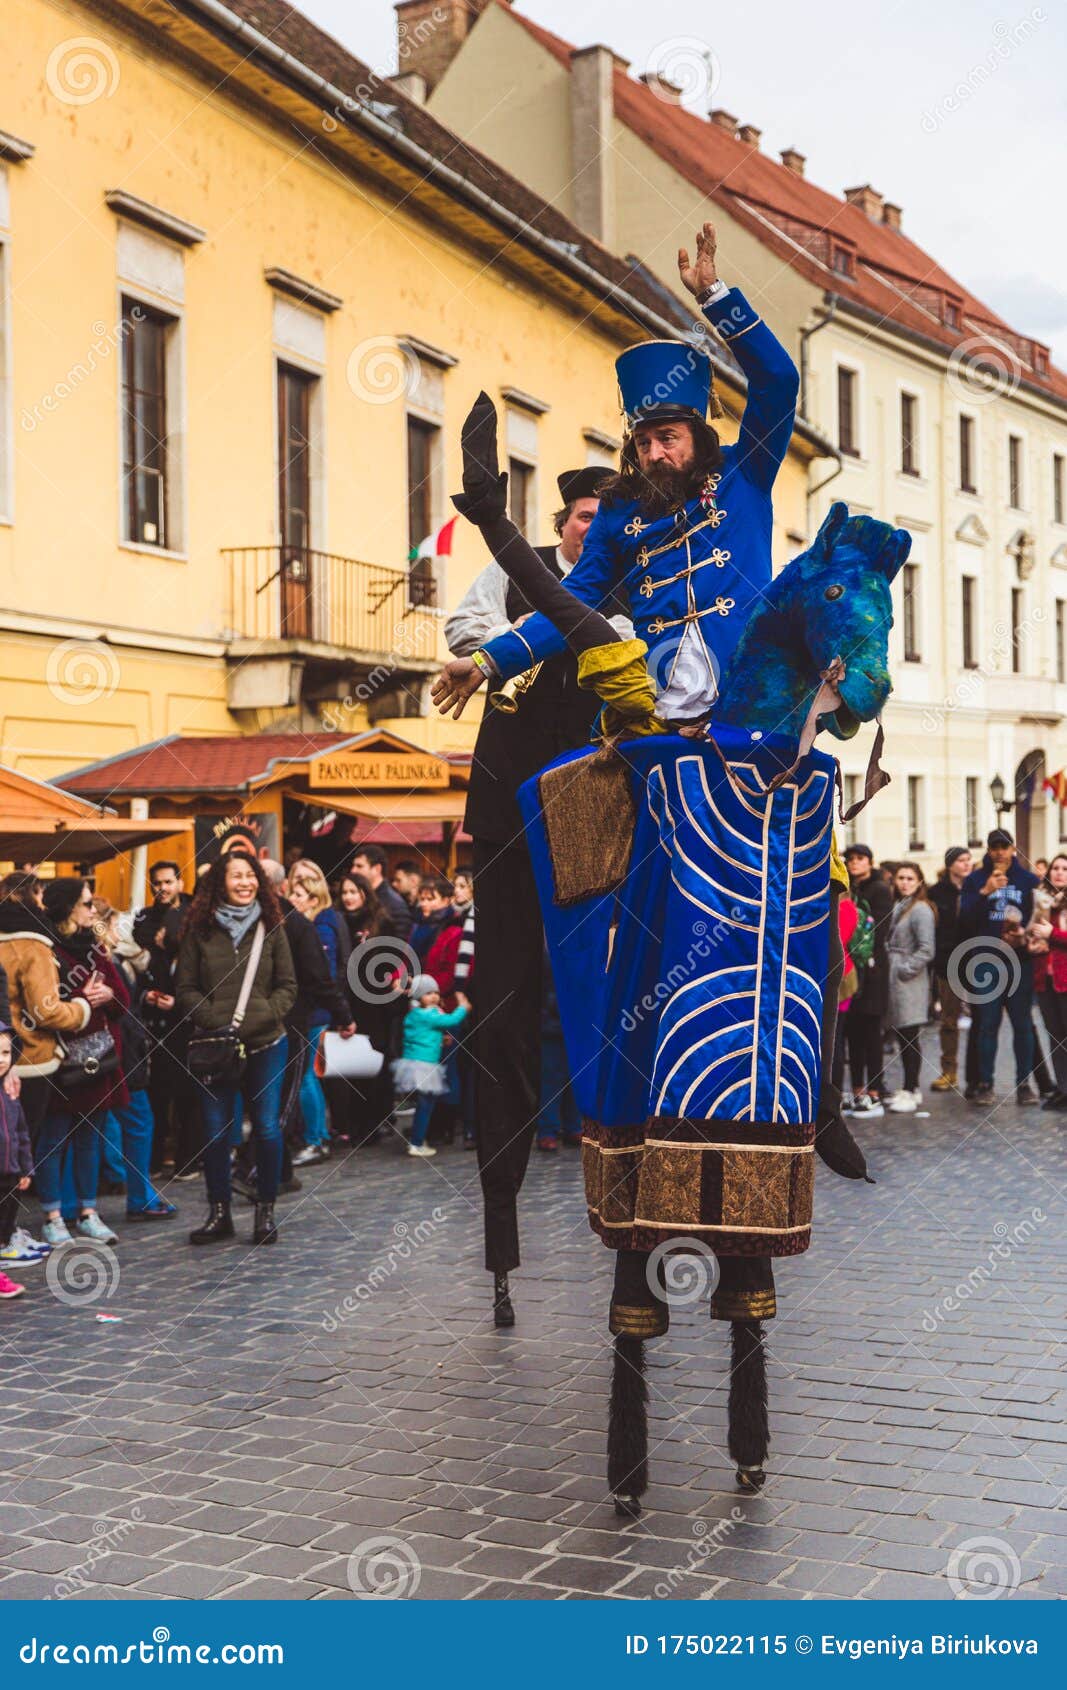 BUDAPEST MARCH 15 Performance of Artists on Stilts on a Street in